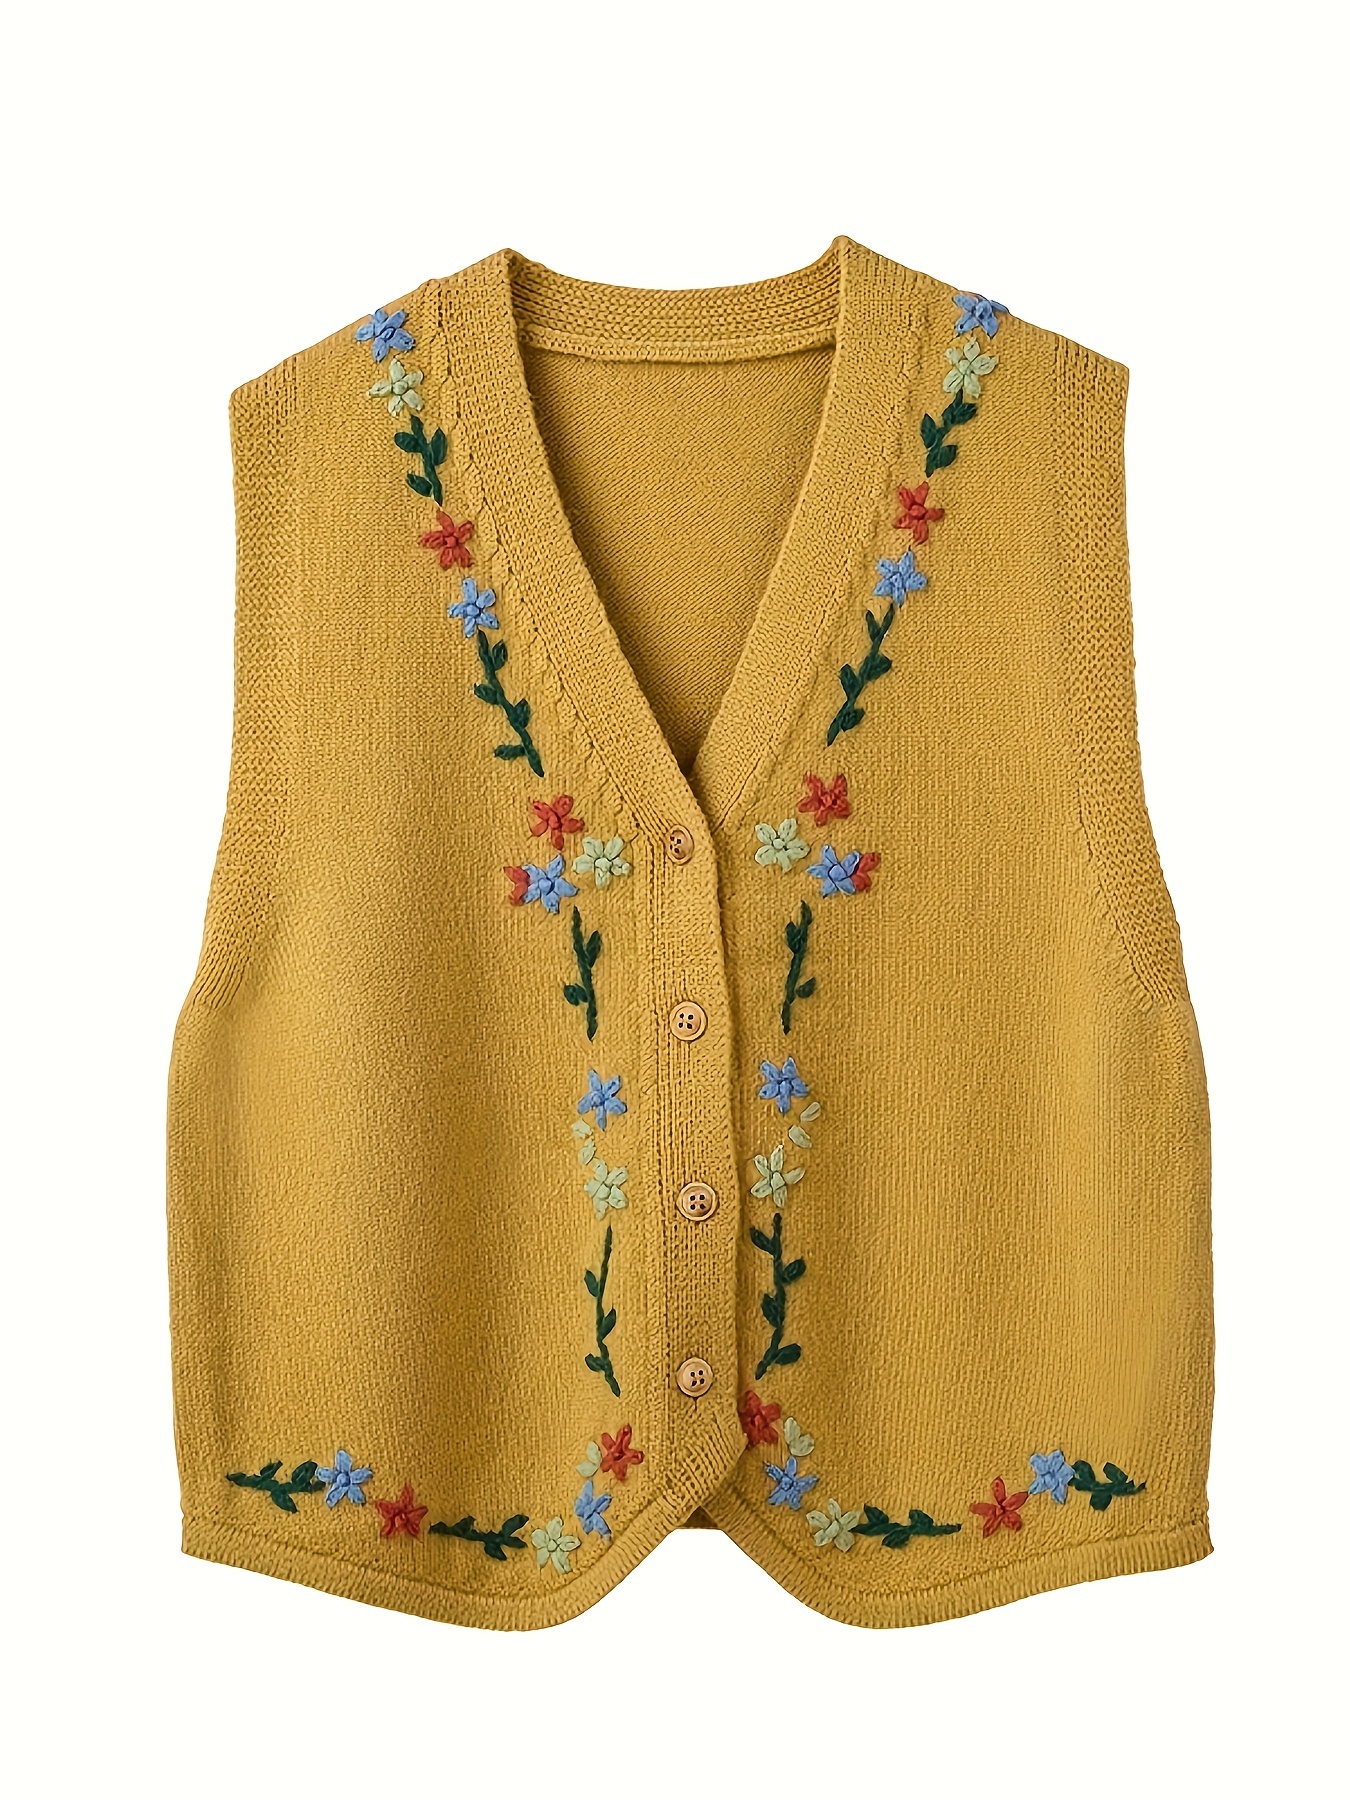 Floral Embroidered Button Up Sweater Vest, Boho V Neck Sleeveless Vest For Spring & Fall, Women's Clothing